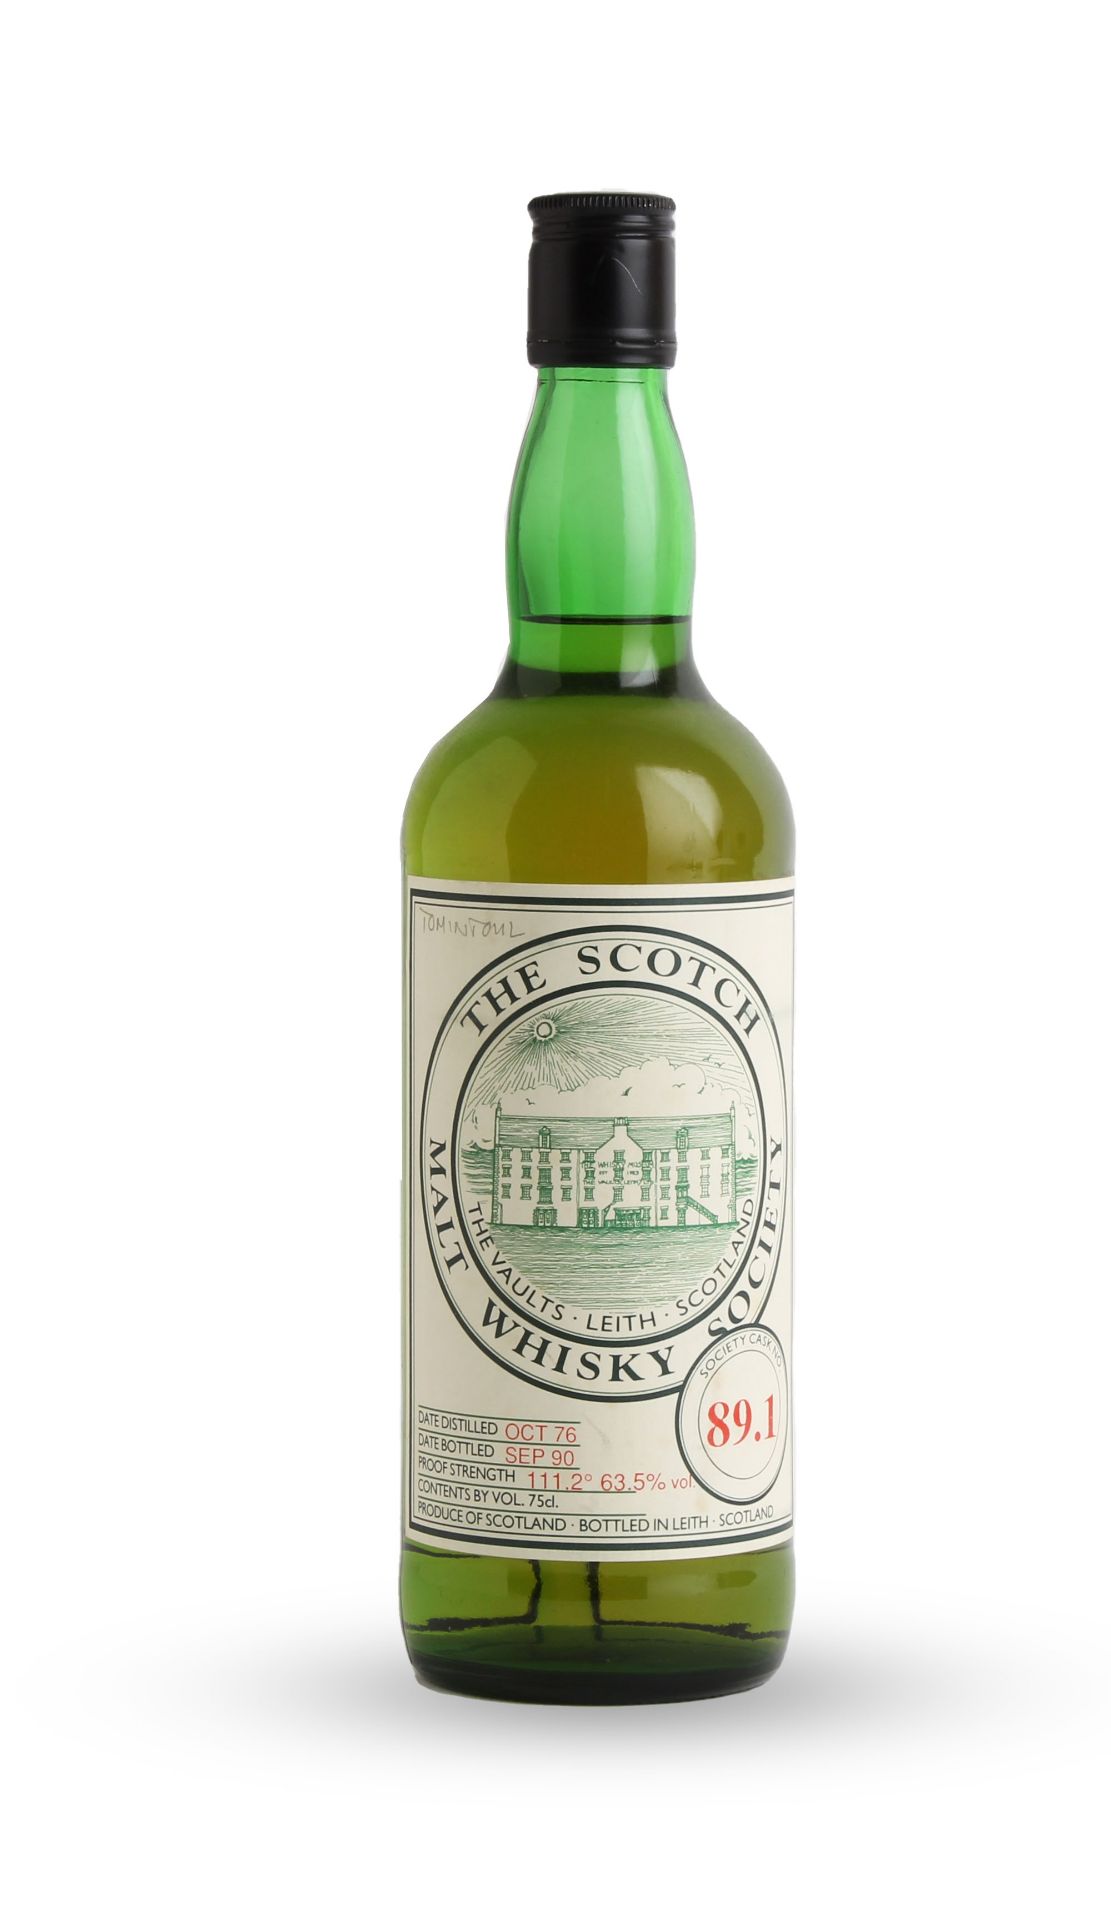 Tomintoul-1976 (SMWS 89.1)